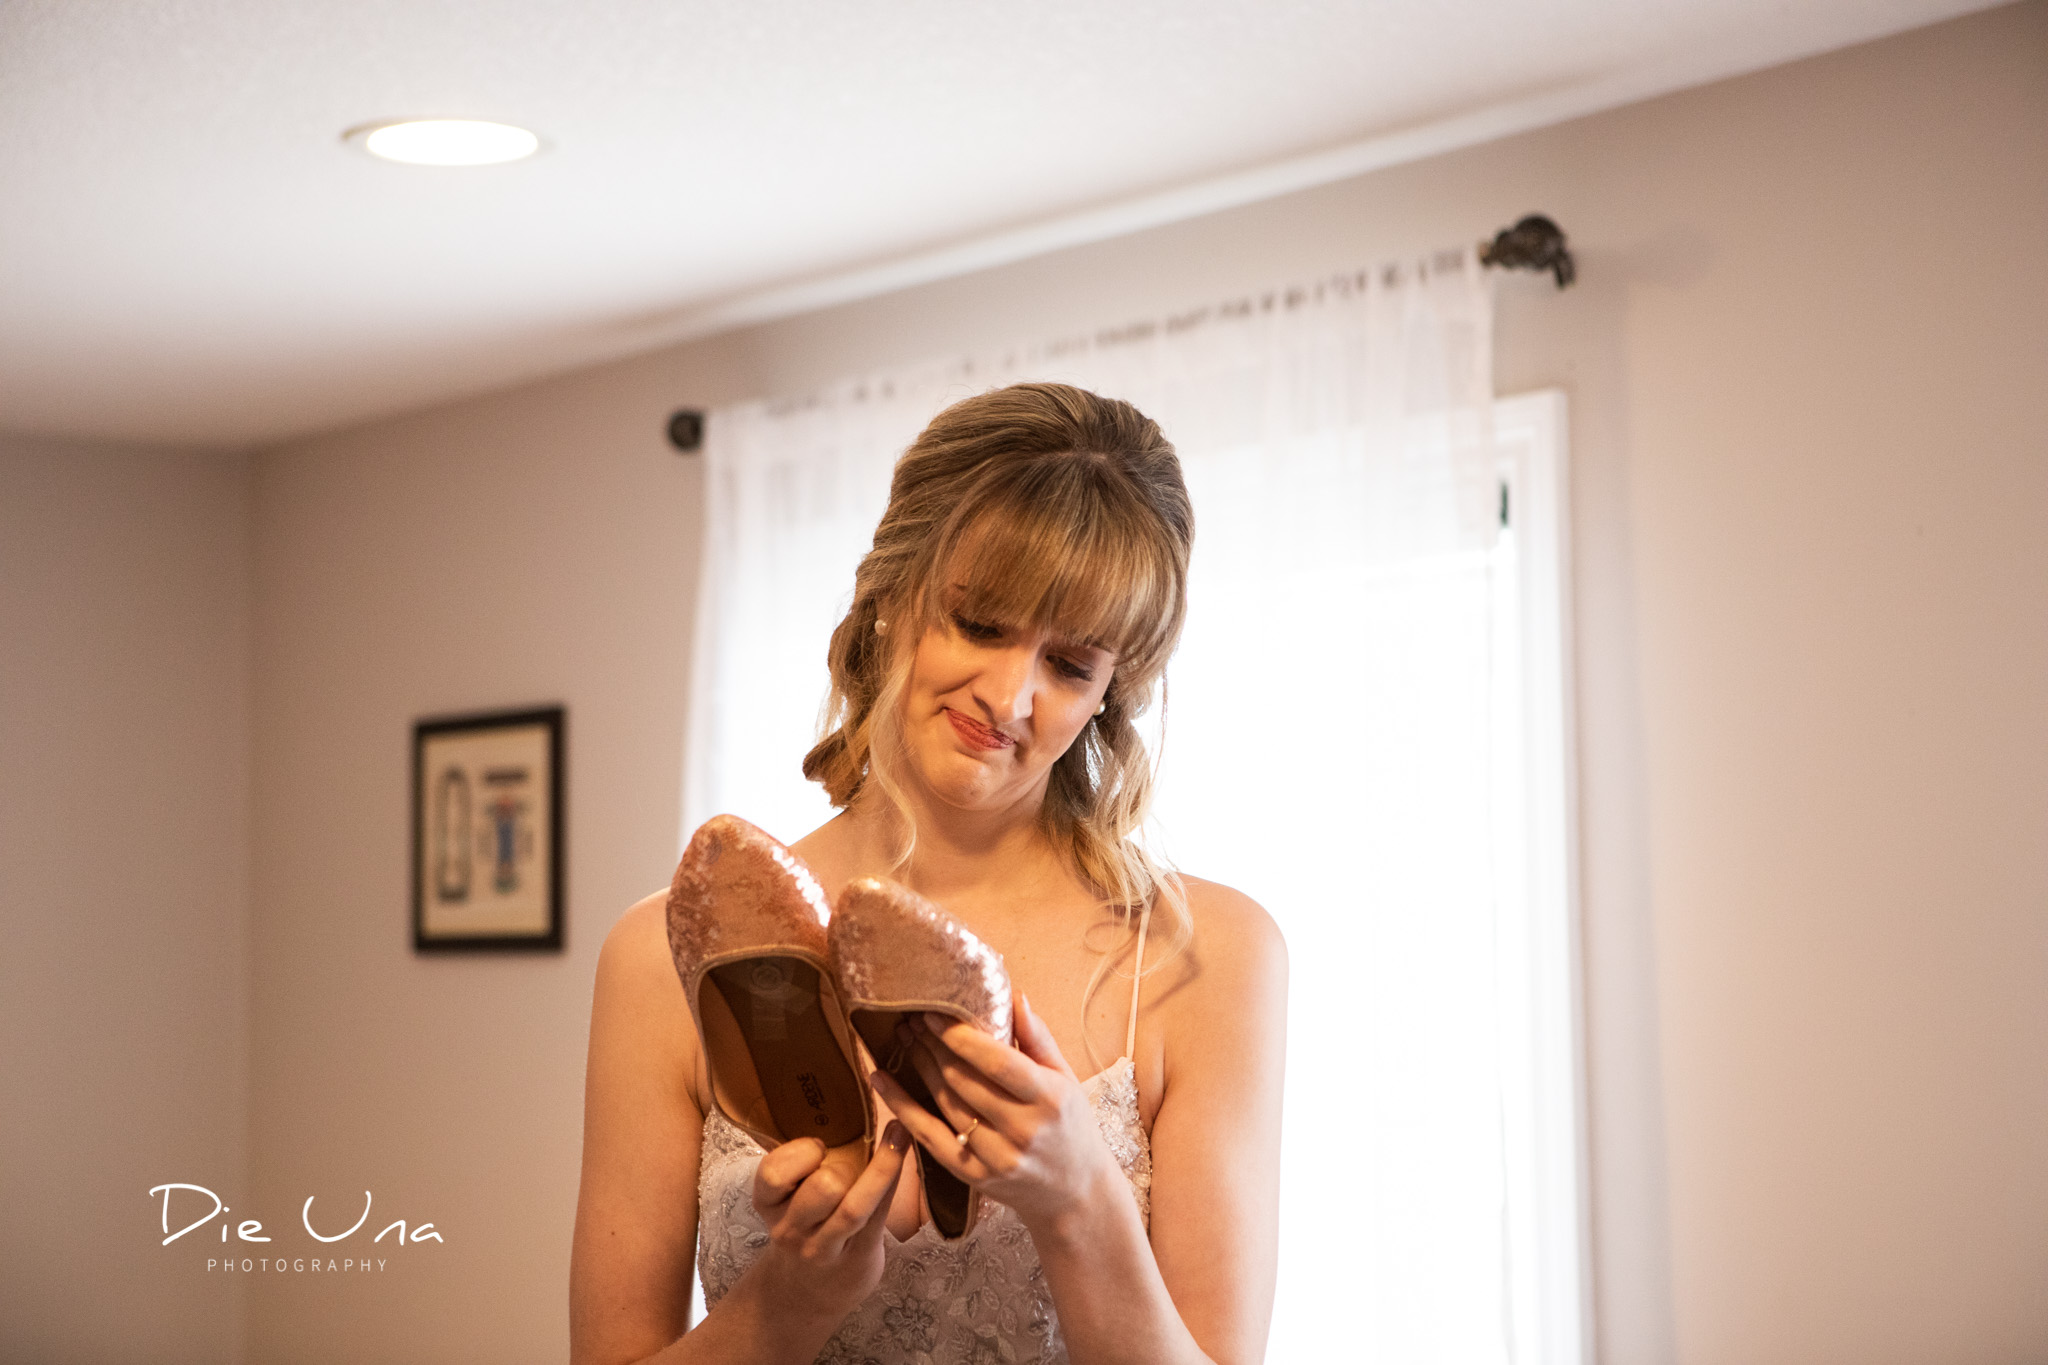 bride reacting to notes written by wedding attendants or bridesmaids on bottom of shoes.jpg